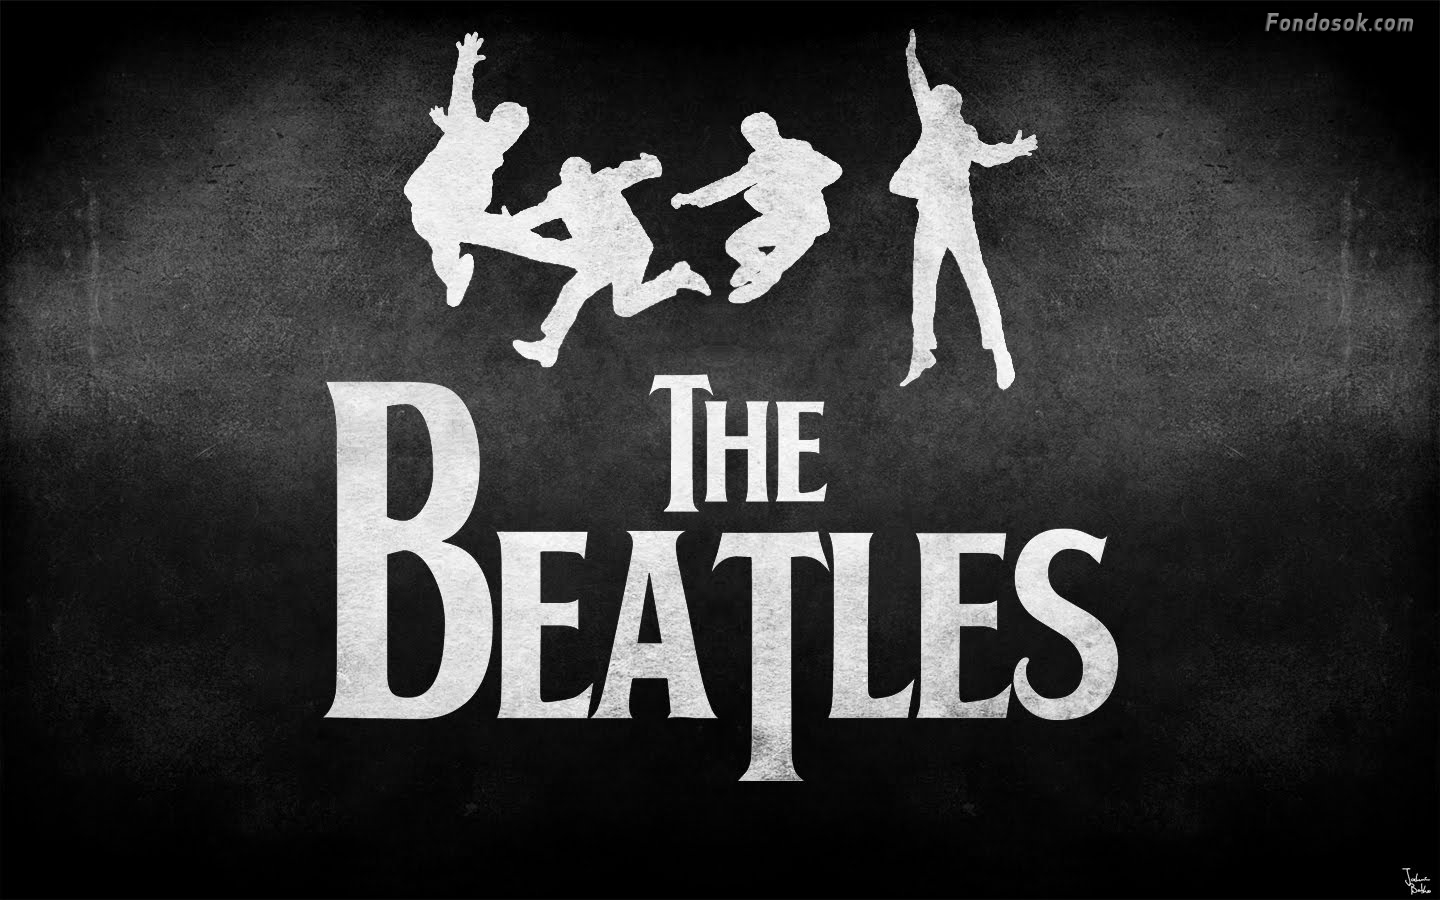 the beatles HD wallpaper, font, text, logo, black and white, graphic design, graphics, photography, brand, photo caption